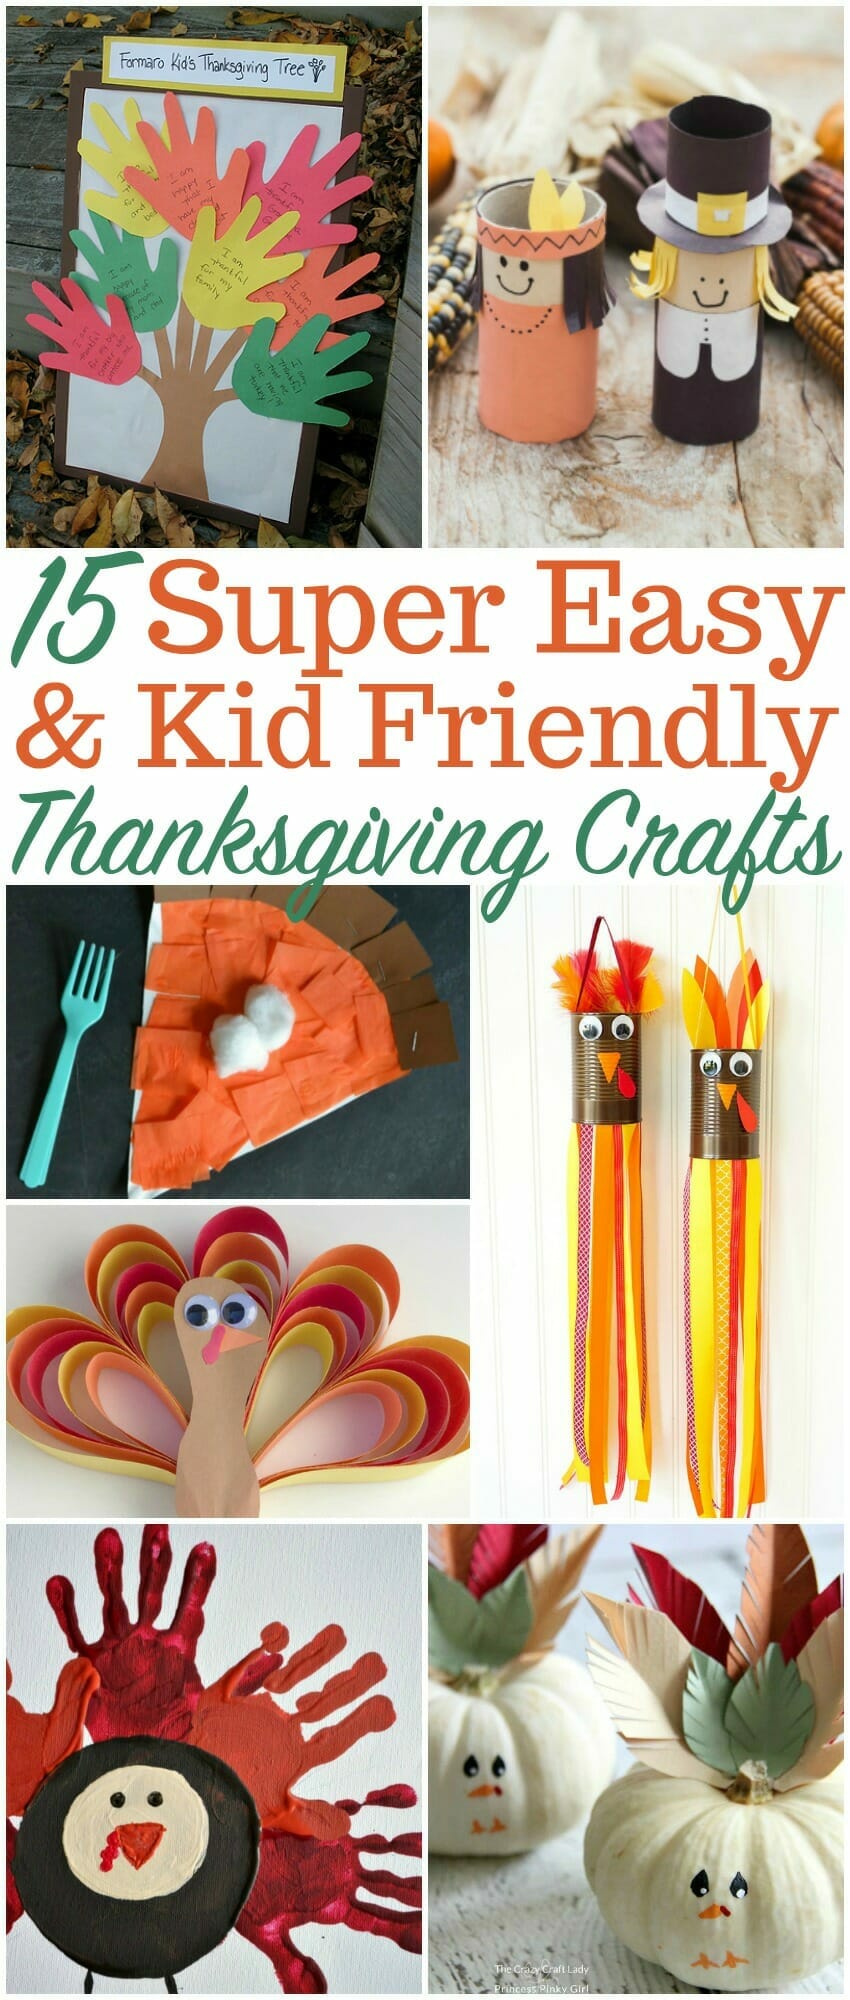 Thanksiving Crafts Your Kids need to make this year!  #thanksgiving crafts #kidscrafts #craft ideas #thanksiving